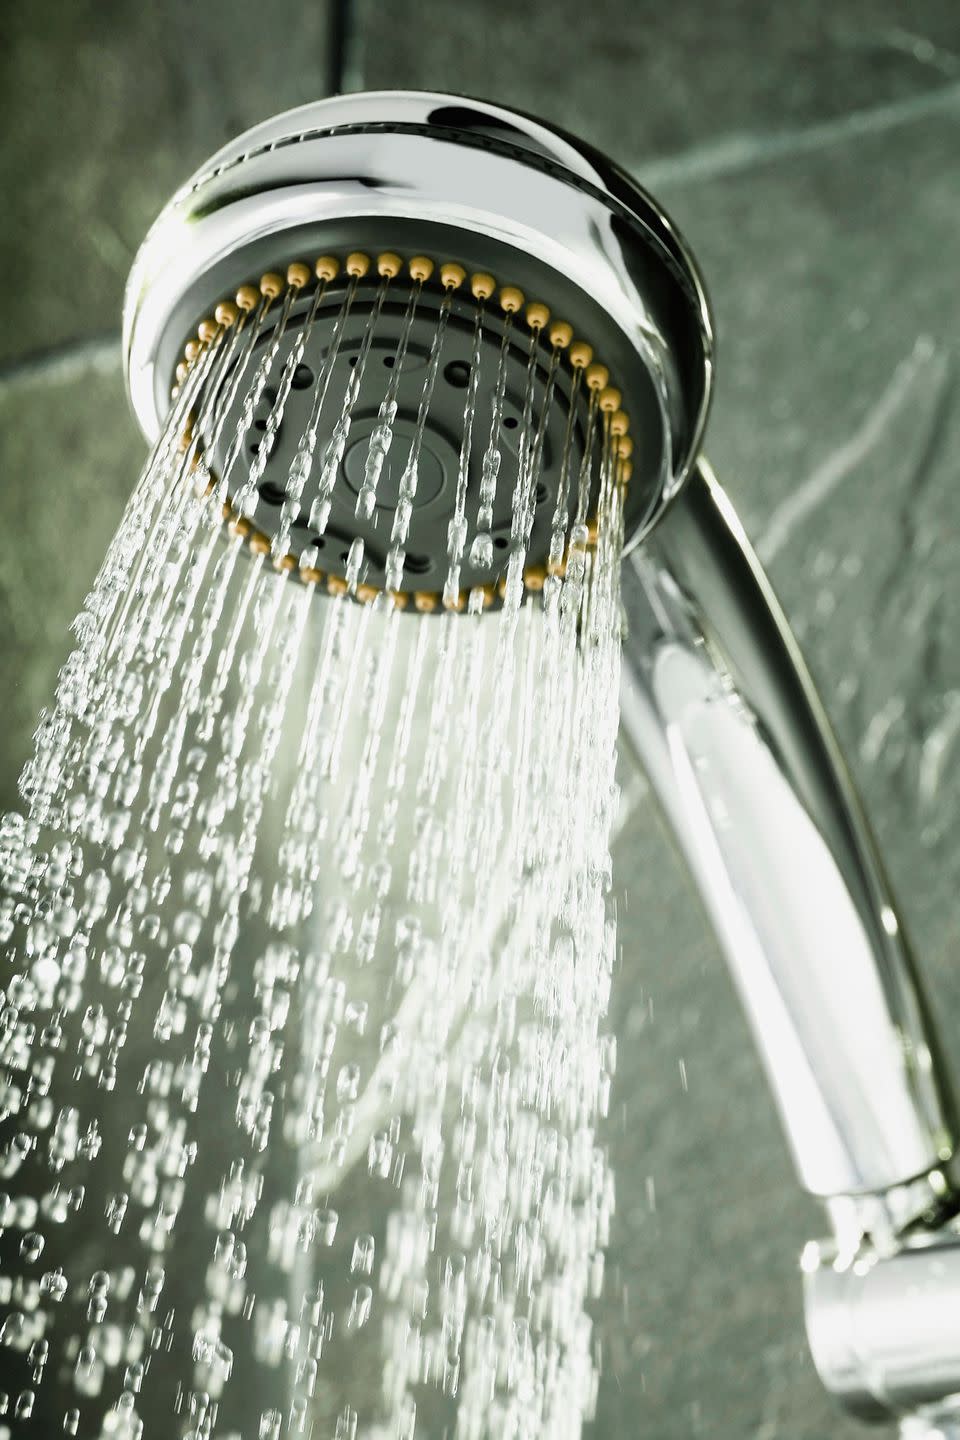 Clean a showerhead with a plastic bag.